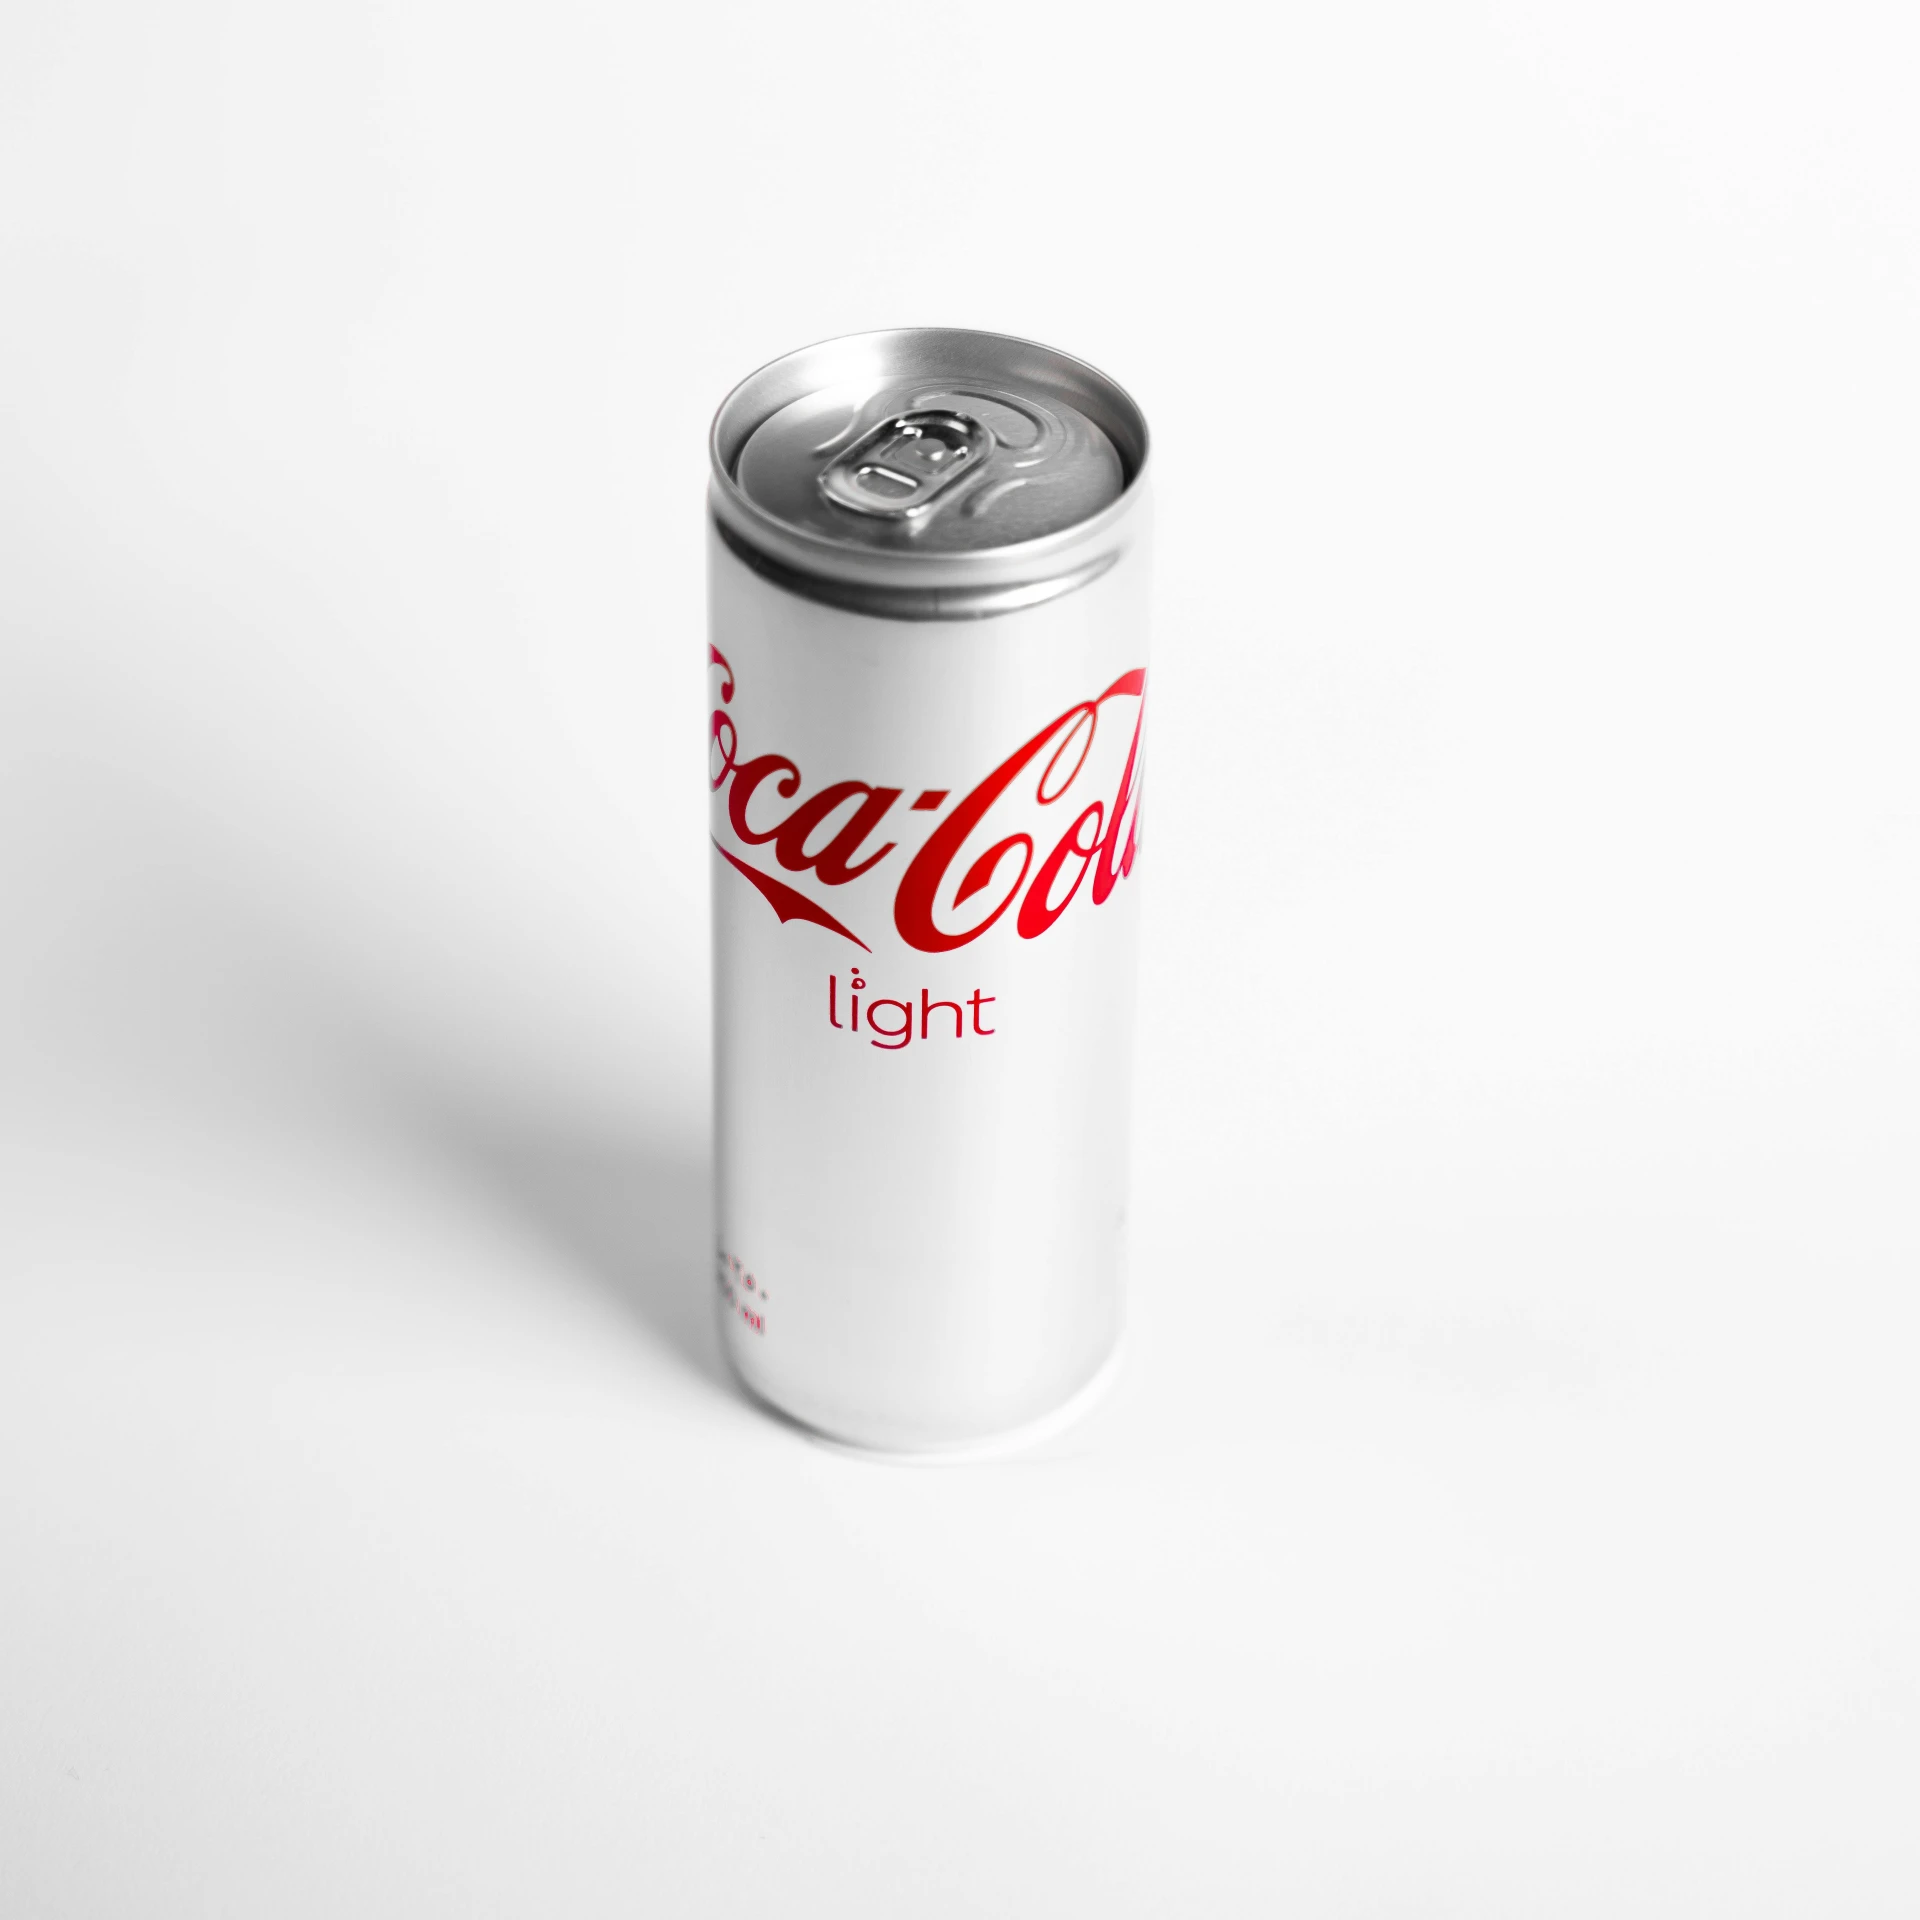 a can of light coke on a white background